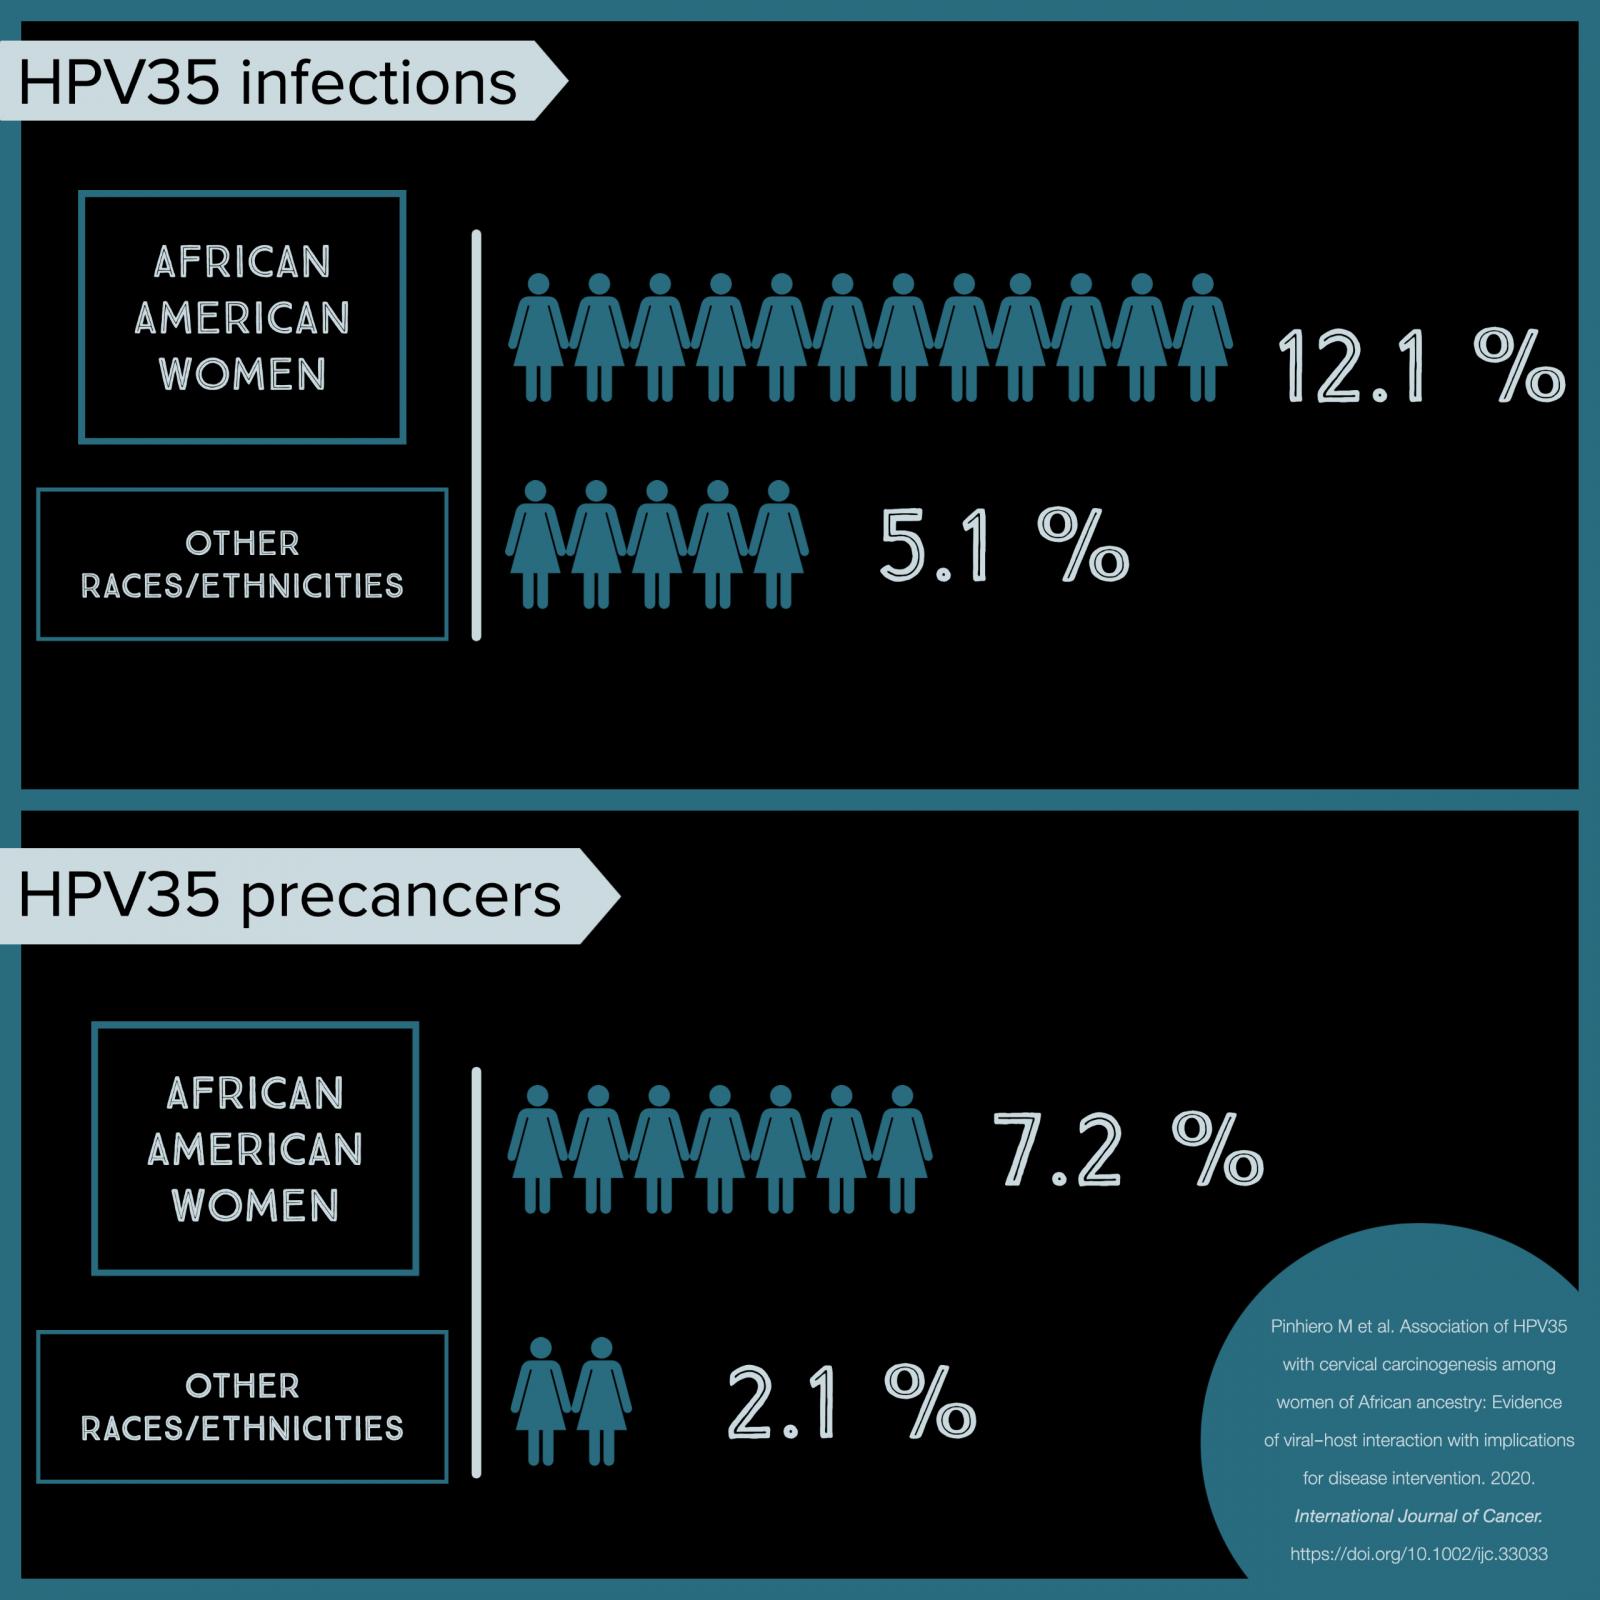 Results showed African American women had more HPV35 infections compared to other races/ethnicities (12.1% vs. 5.1%) and more HPV35-associated precancers (7.2% vs. 2.1%)